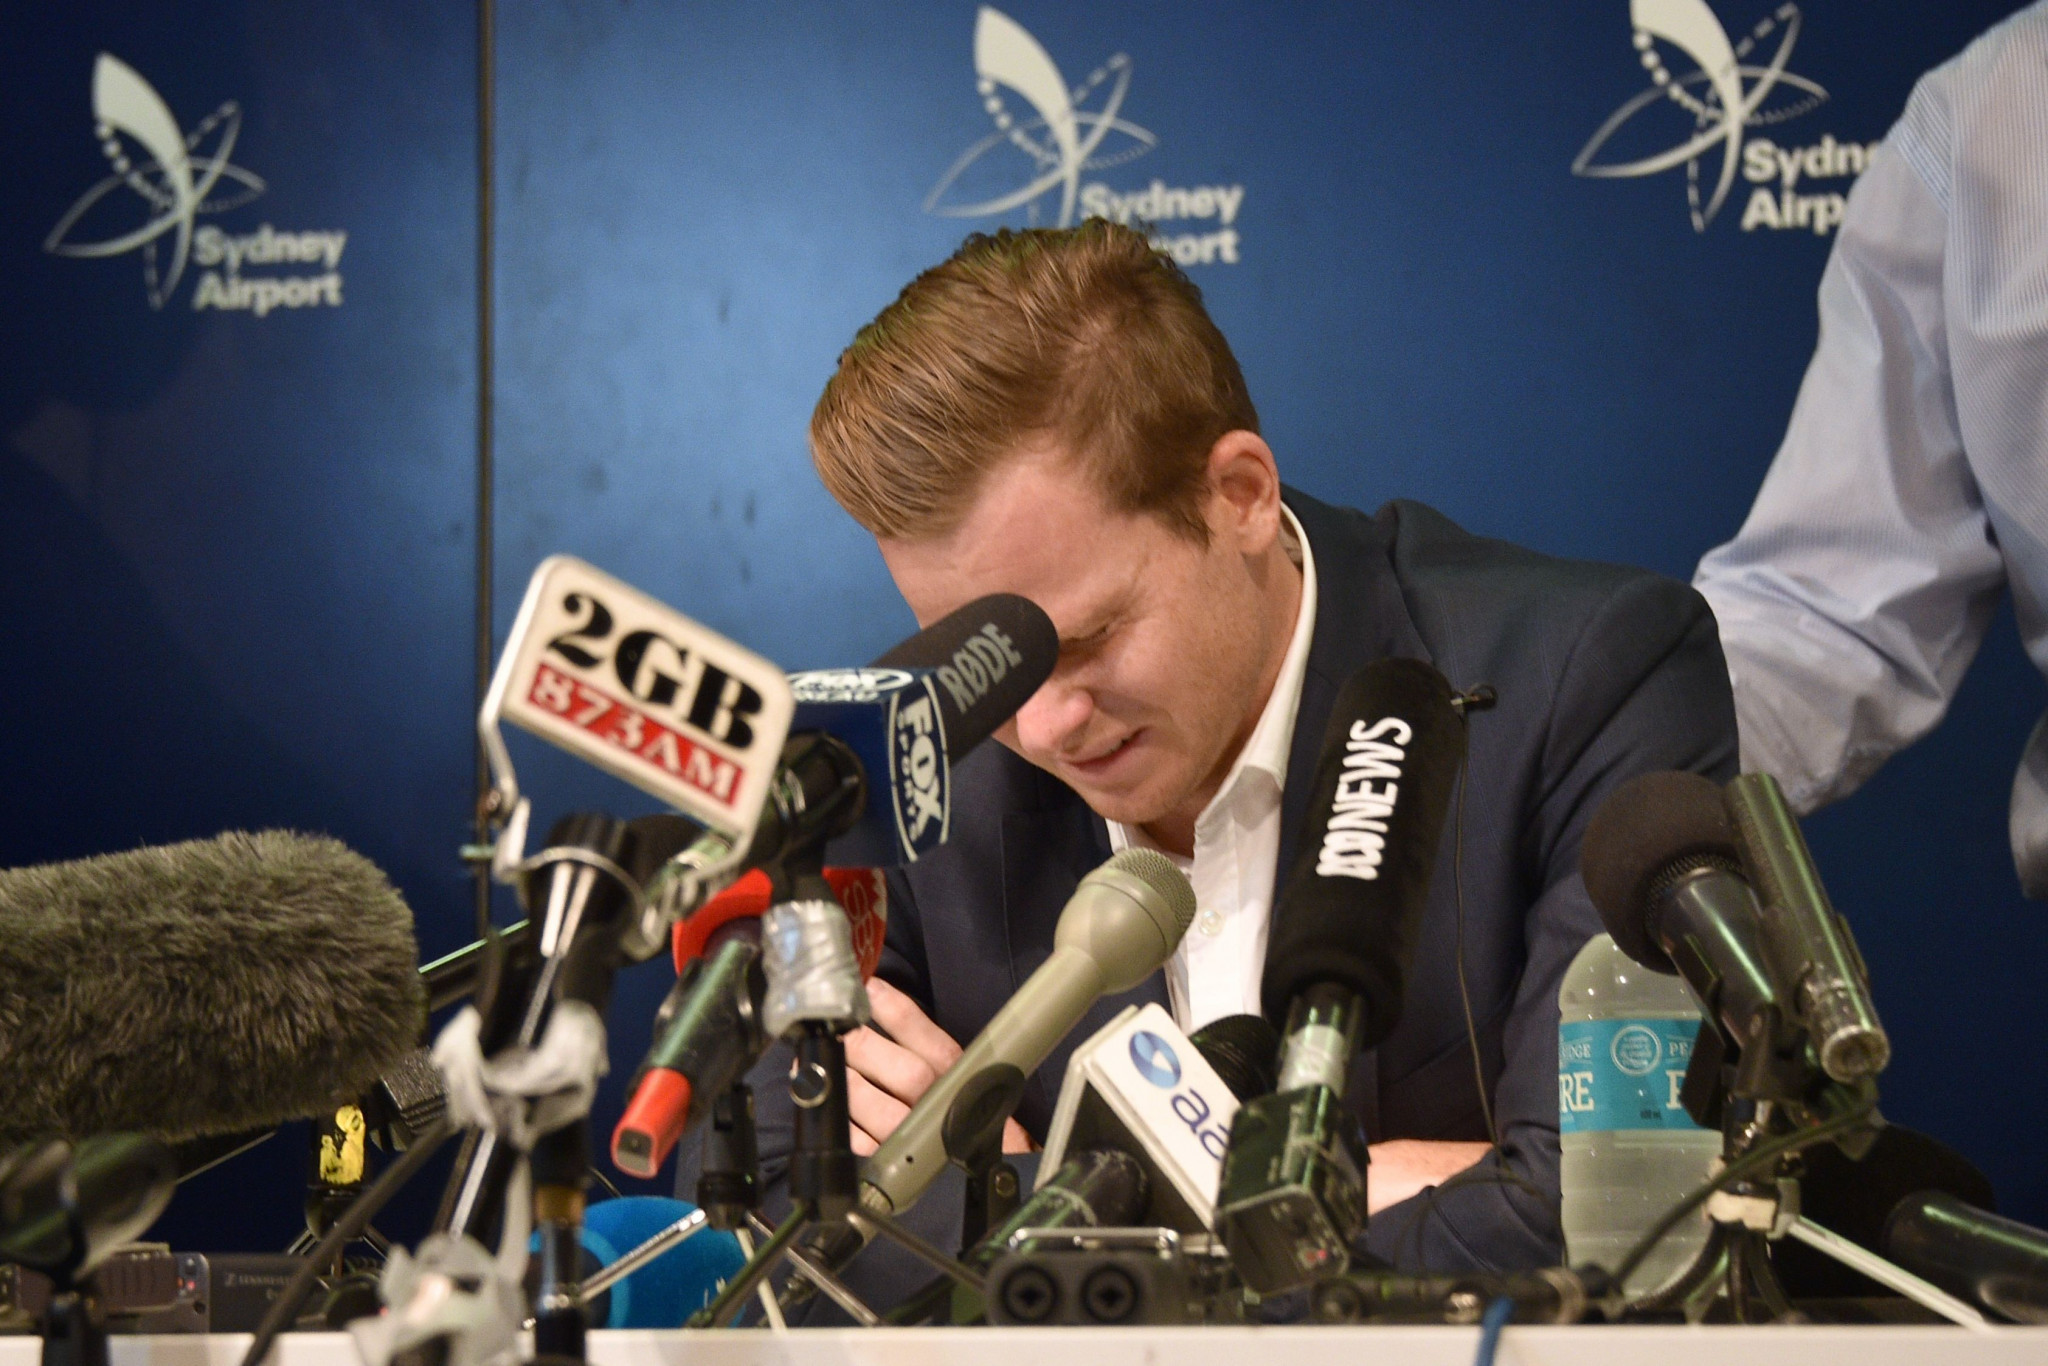 Steve Smith's emotional press conference appearance last week split opinion ©Getty Images